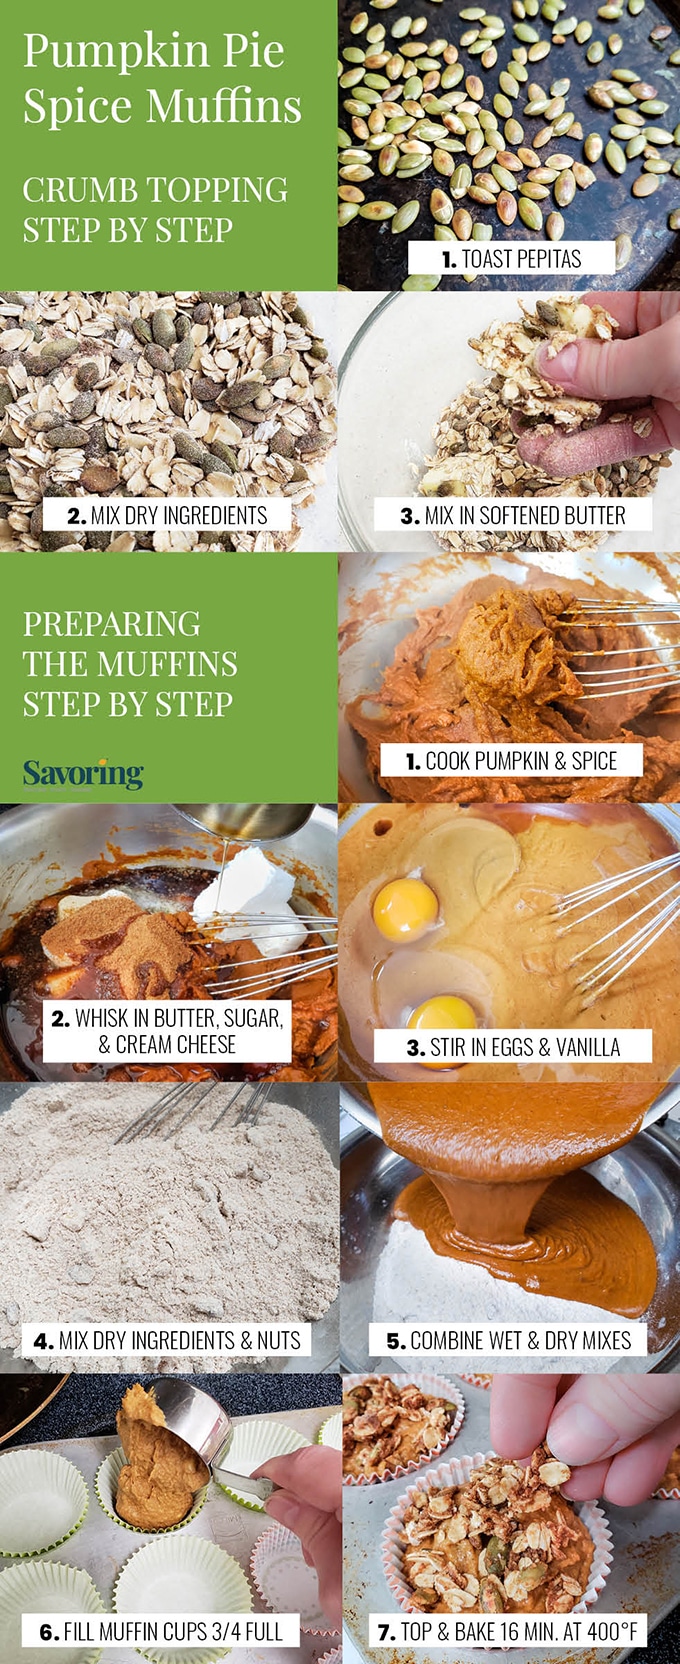 Step by step collage of how to make pumpkin pie spice muffins.